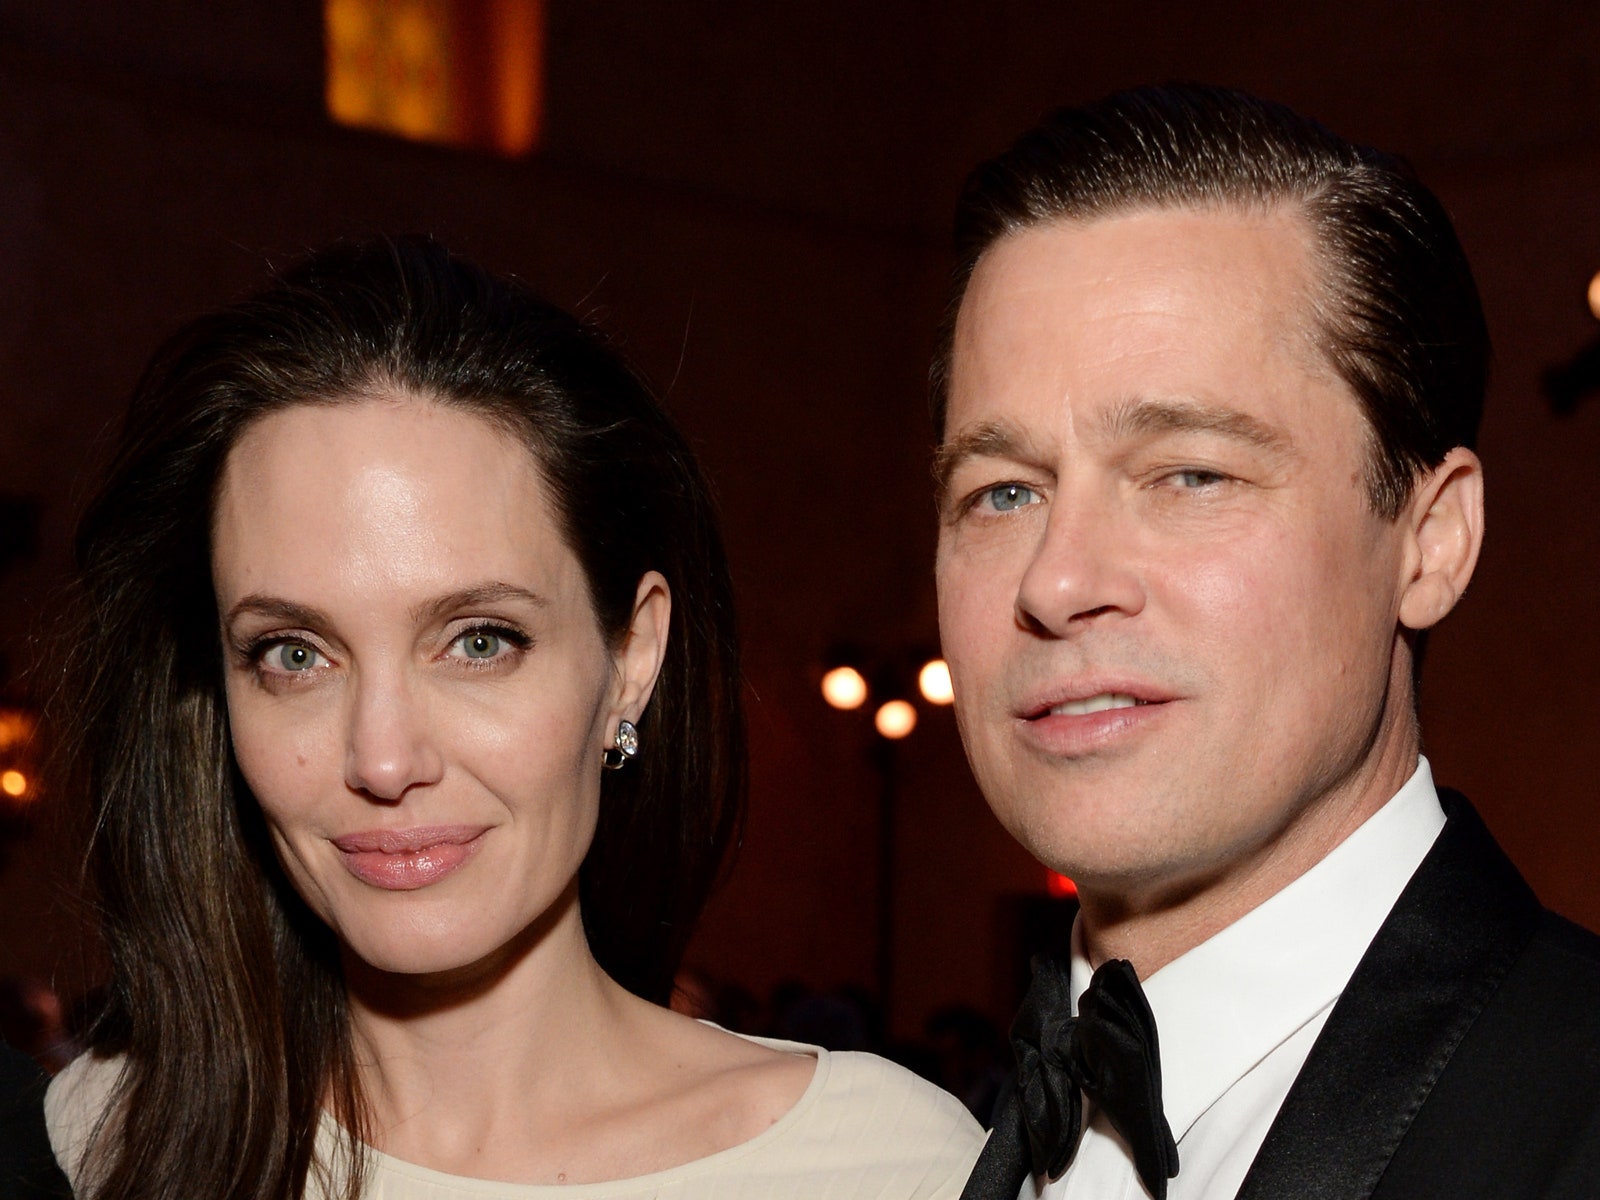 Angelina Jolie and Brad Pitt’s Former New Orleans Home Sells for $2.8 Million in Auction